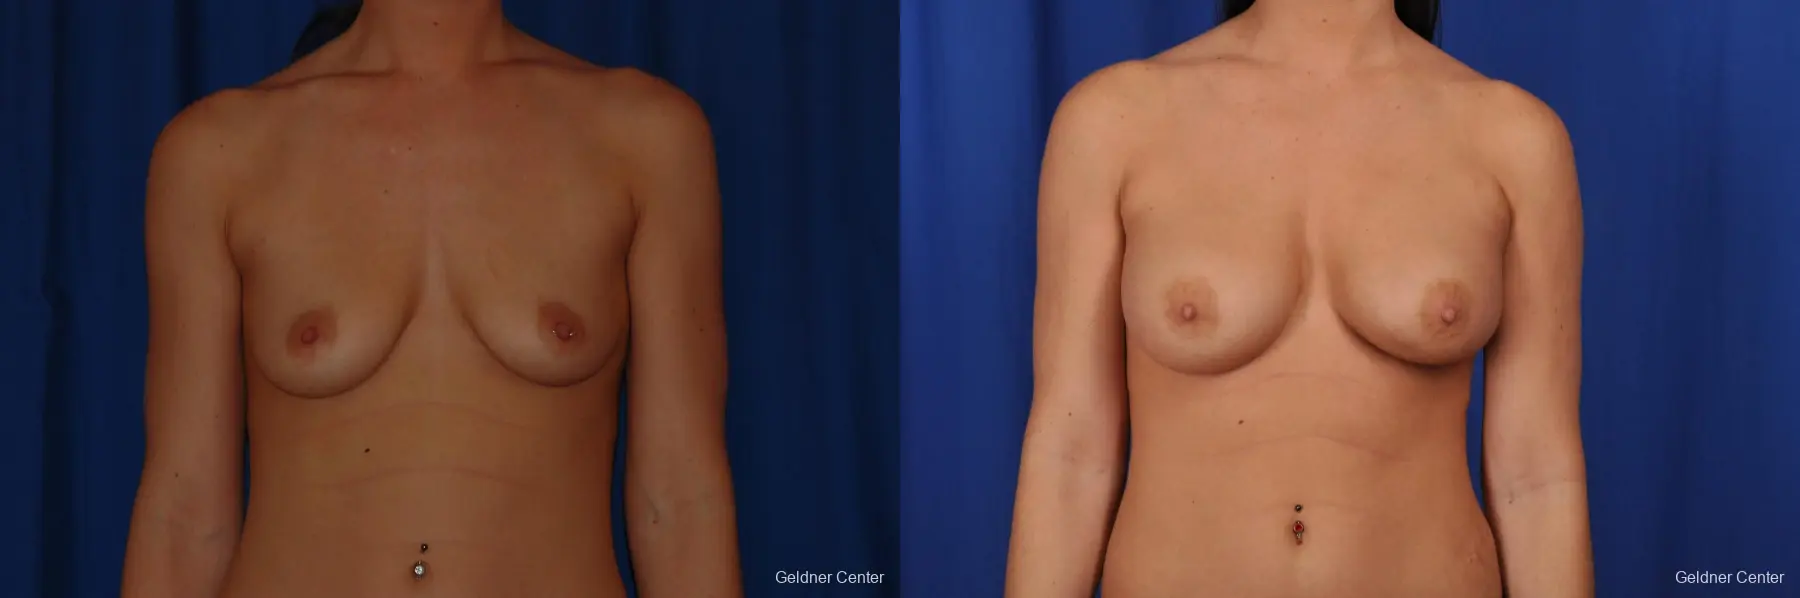 Breast Augmentation Streeterville, Chicago 2071 - Before and After